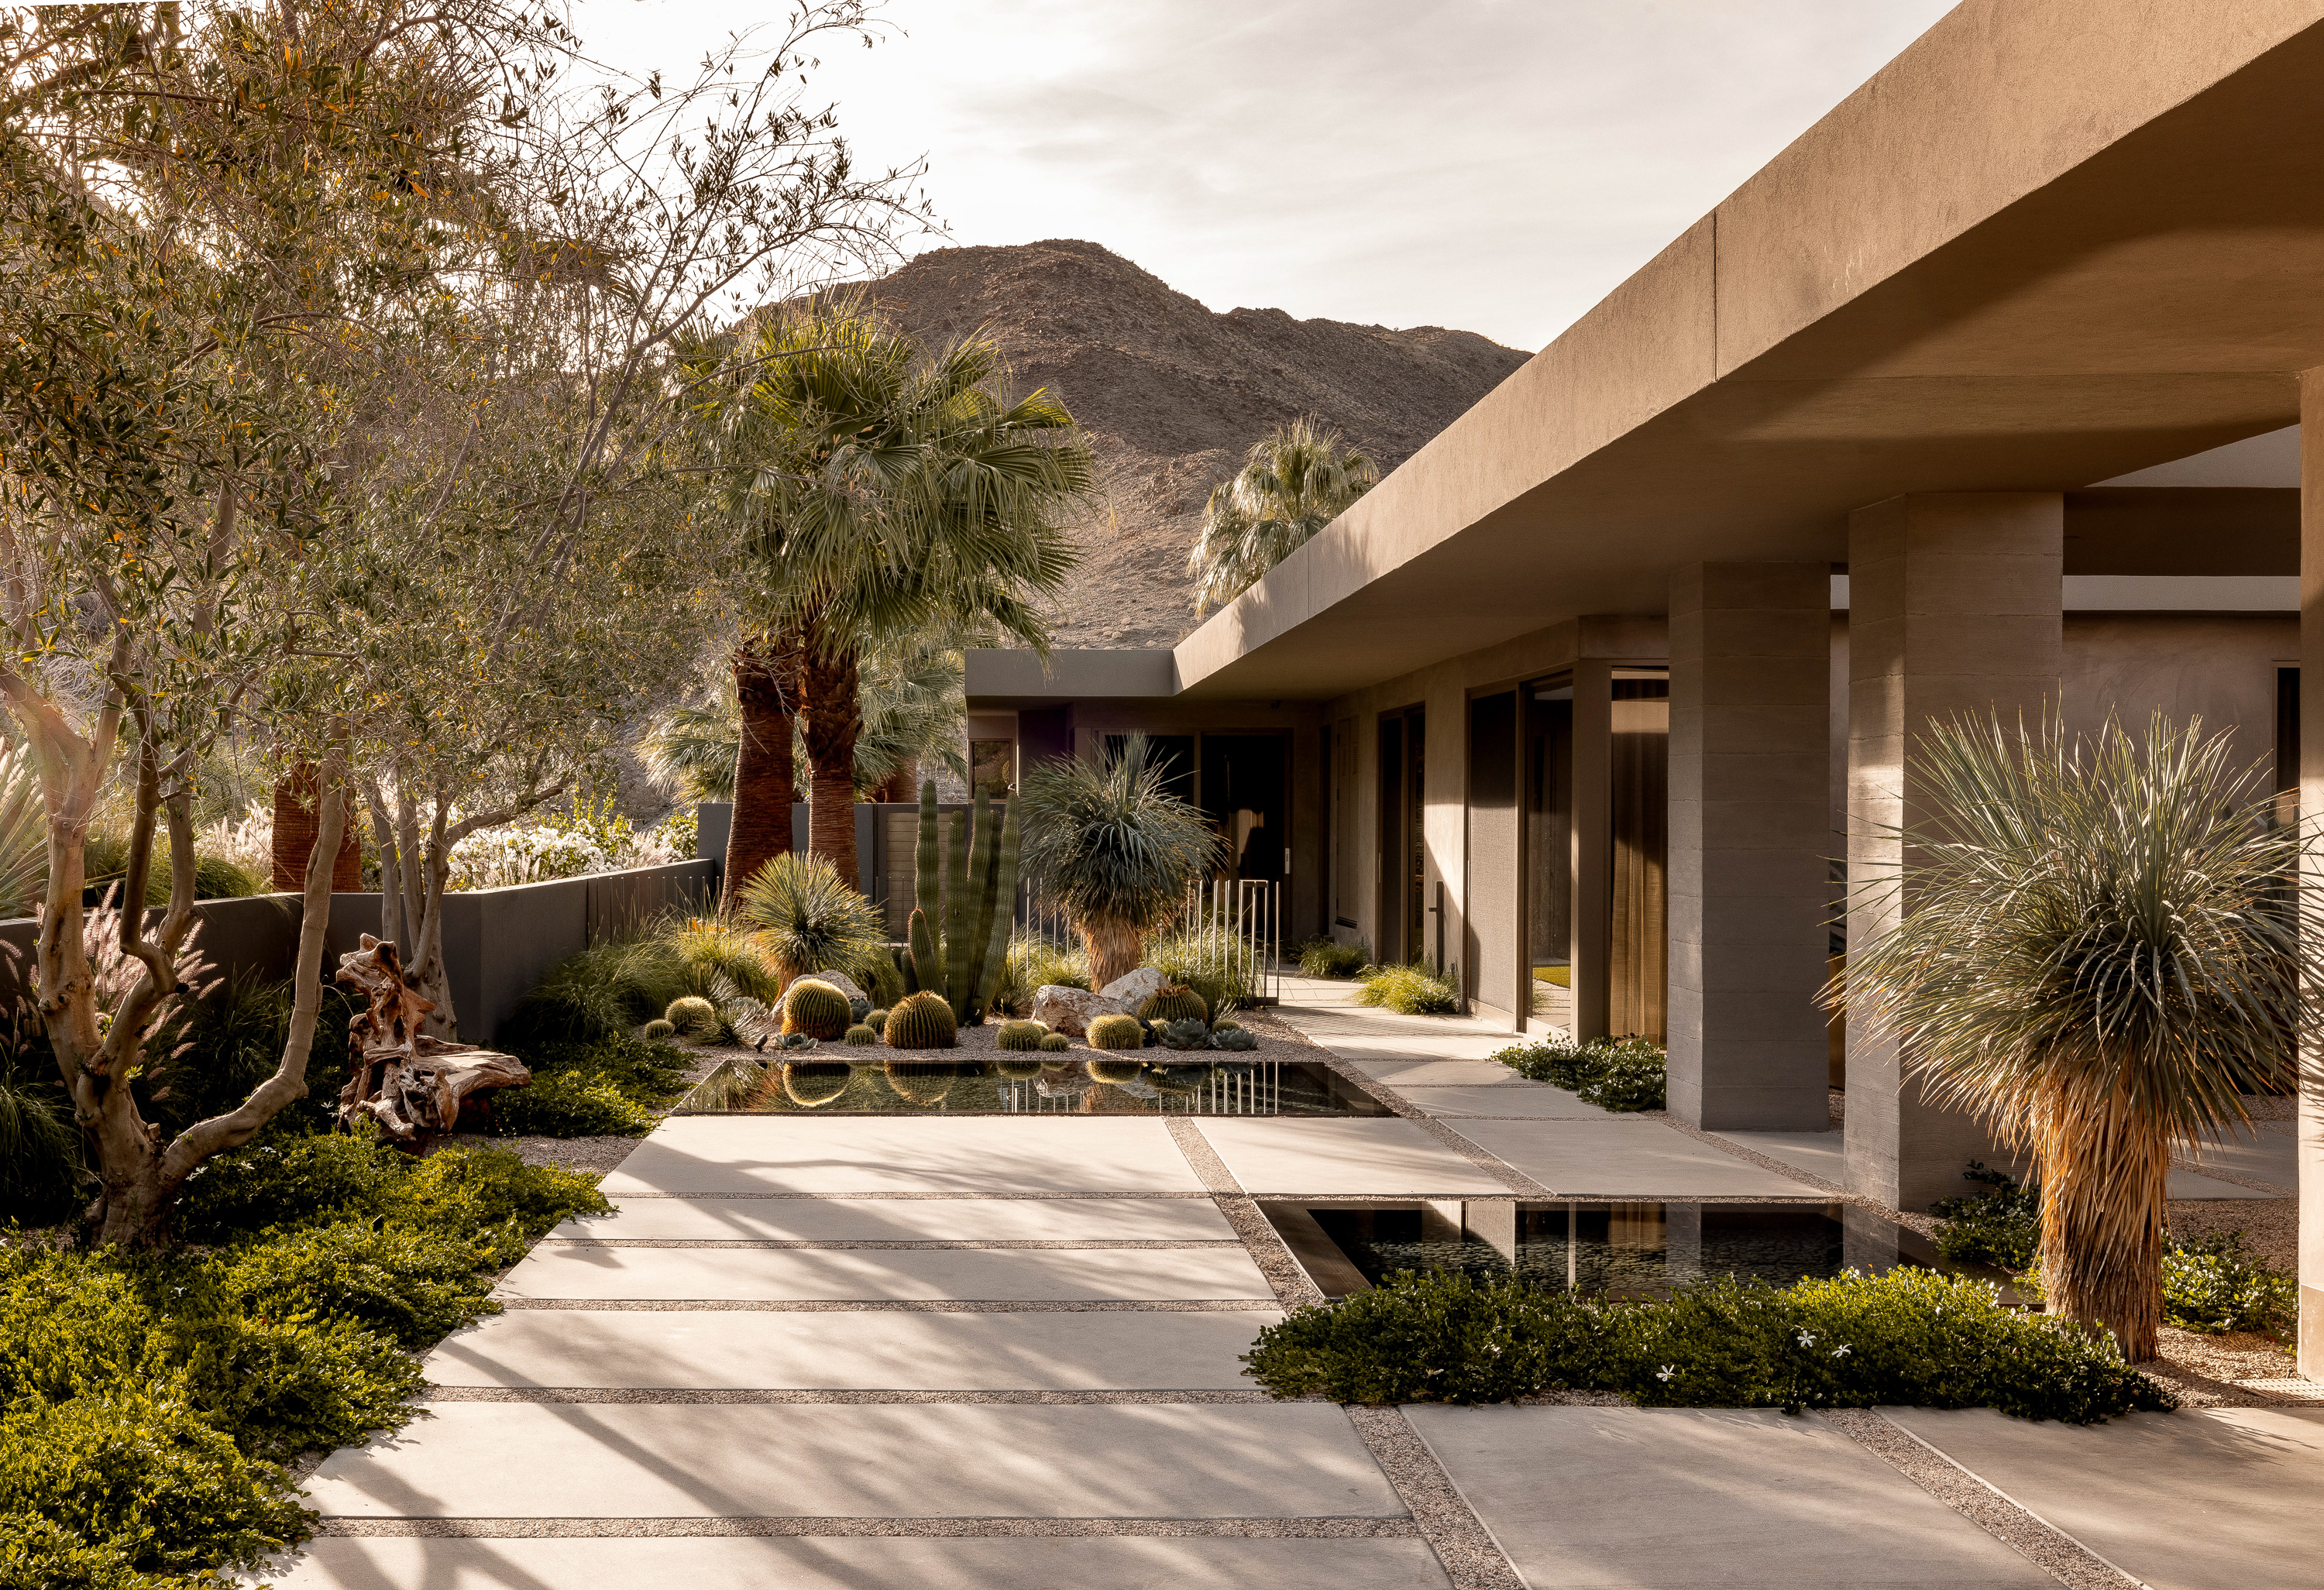 Grand entry with reflective pools, concrete pads, and lush cacti and palm garden, inviting you into Desert Retreat's modern oasis.